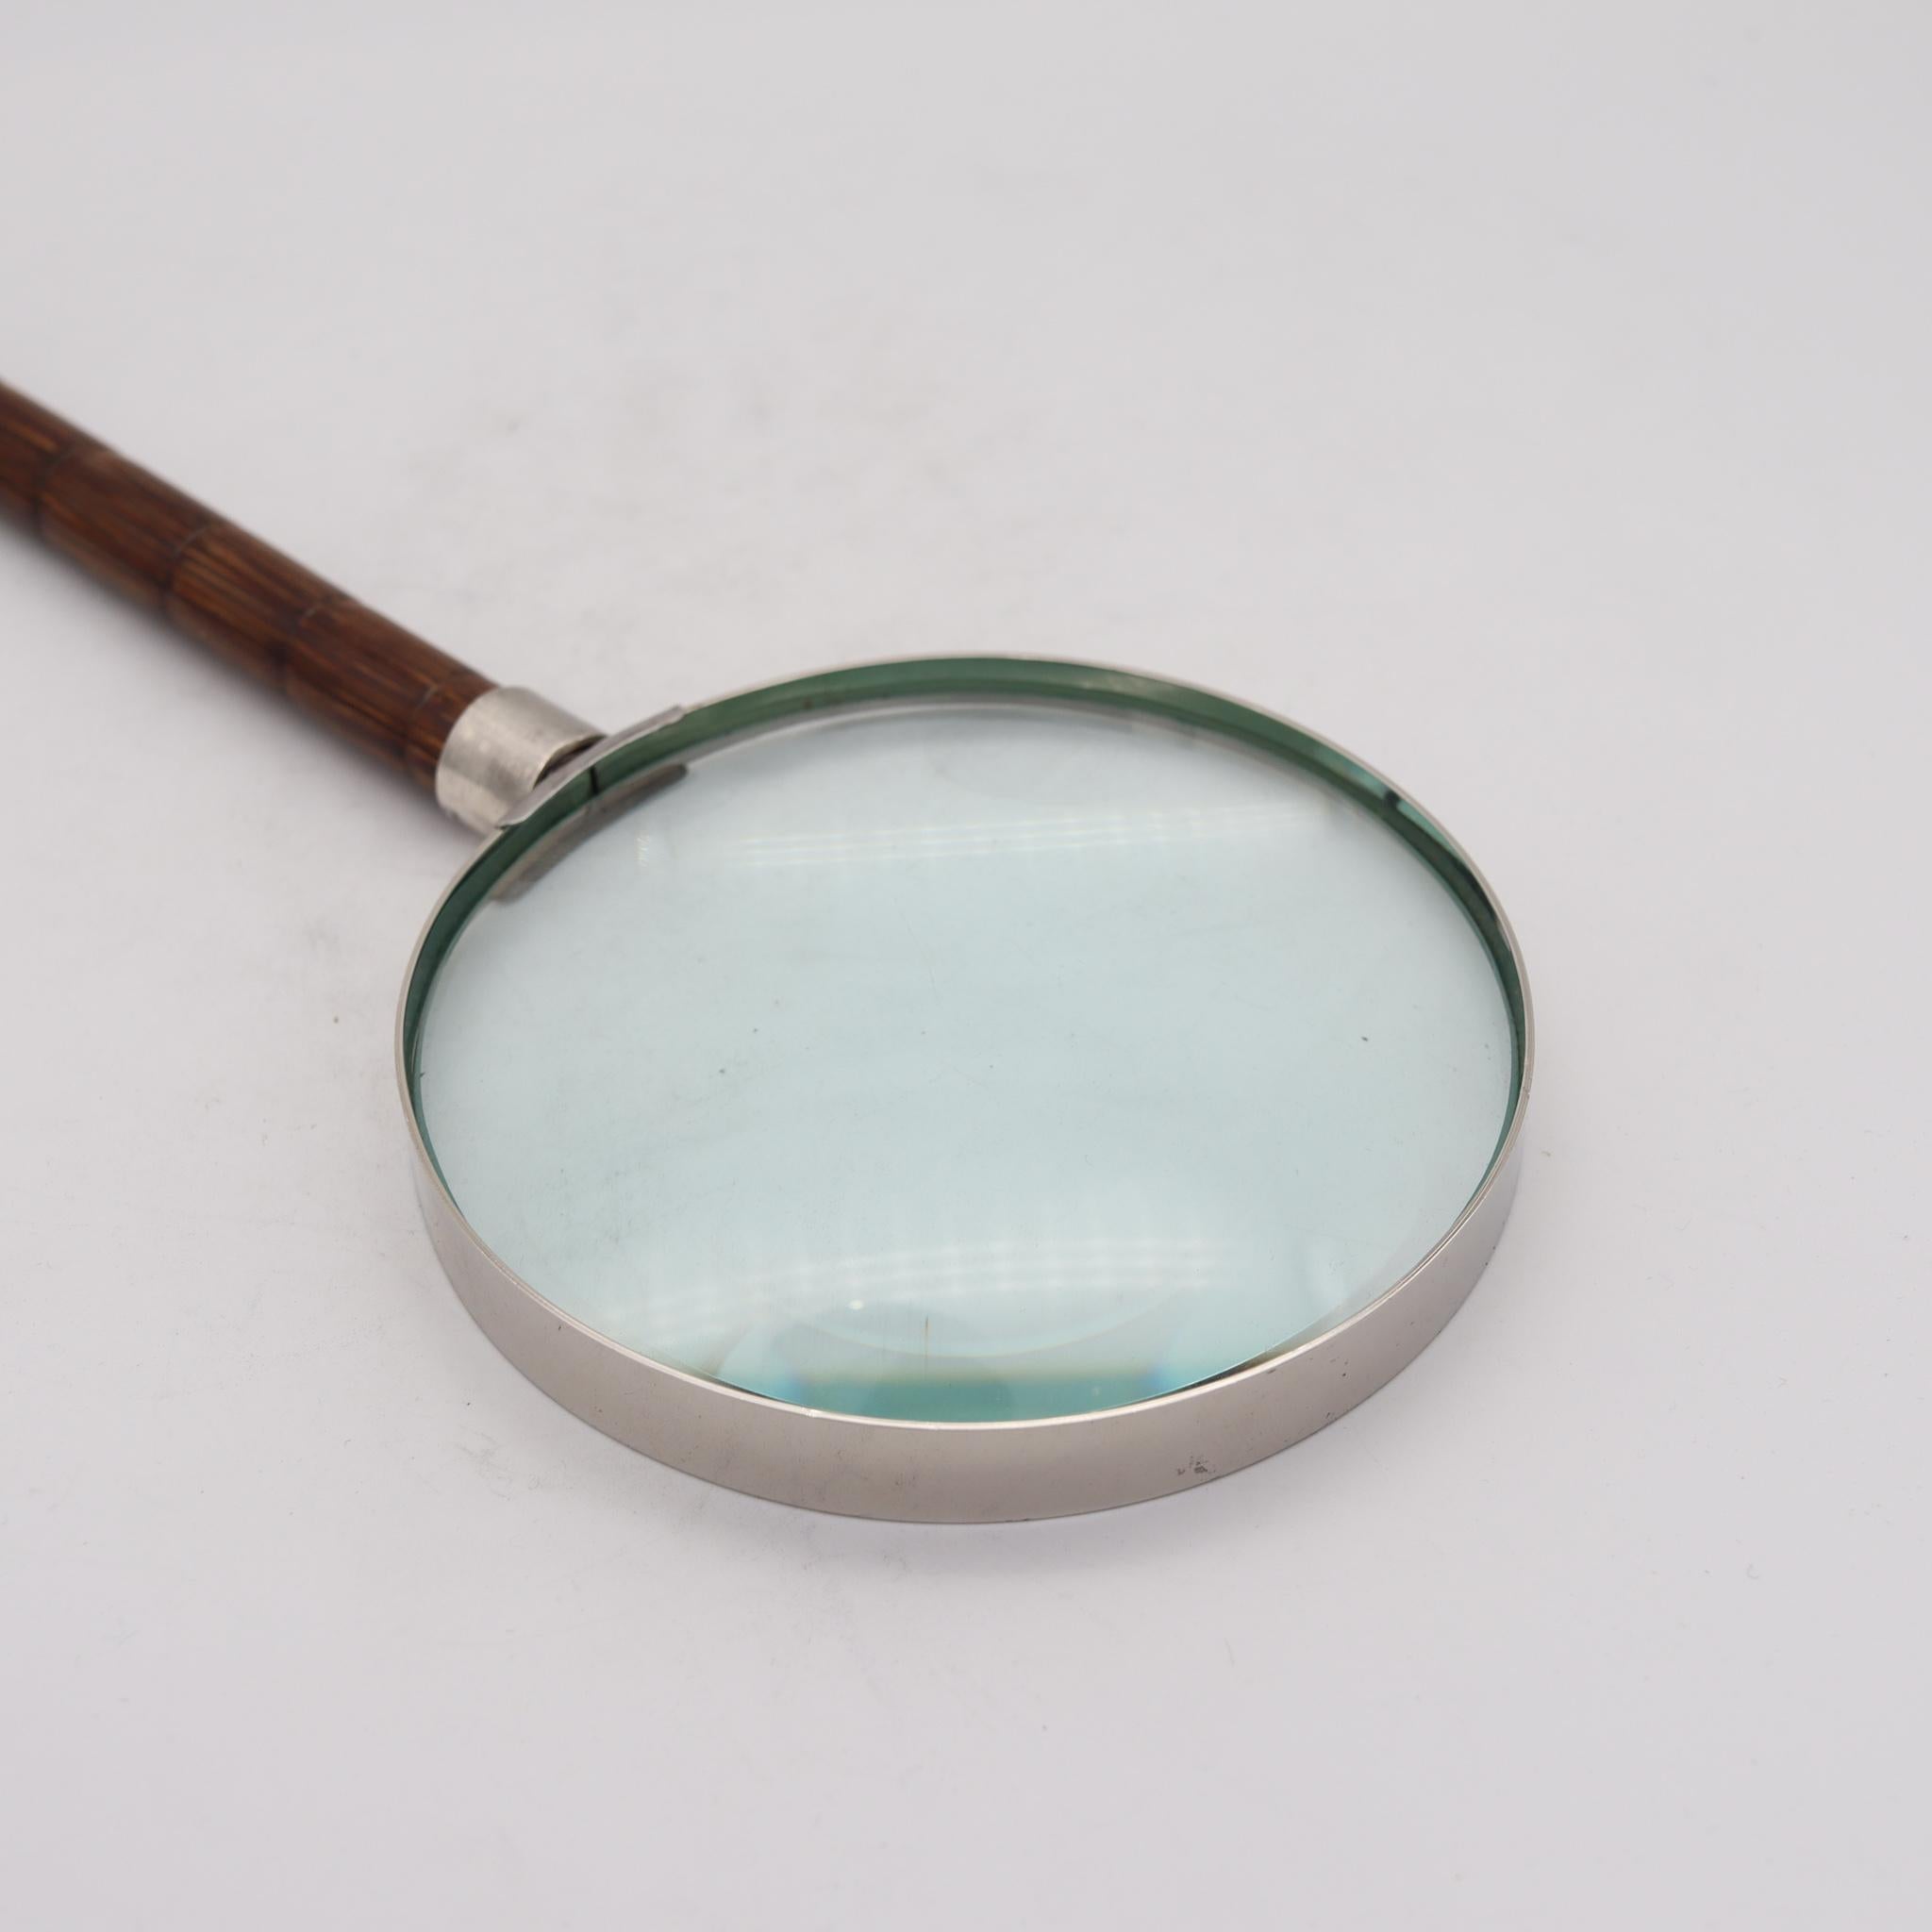 English Edwardian 1905 Handle Desk Magnifier Glass in Sterling Silver and Bamboo Wood For Sale